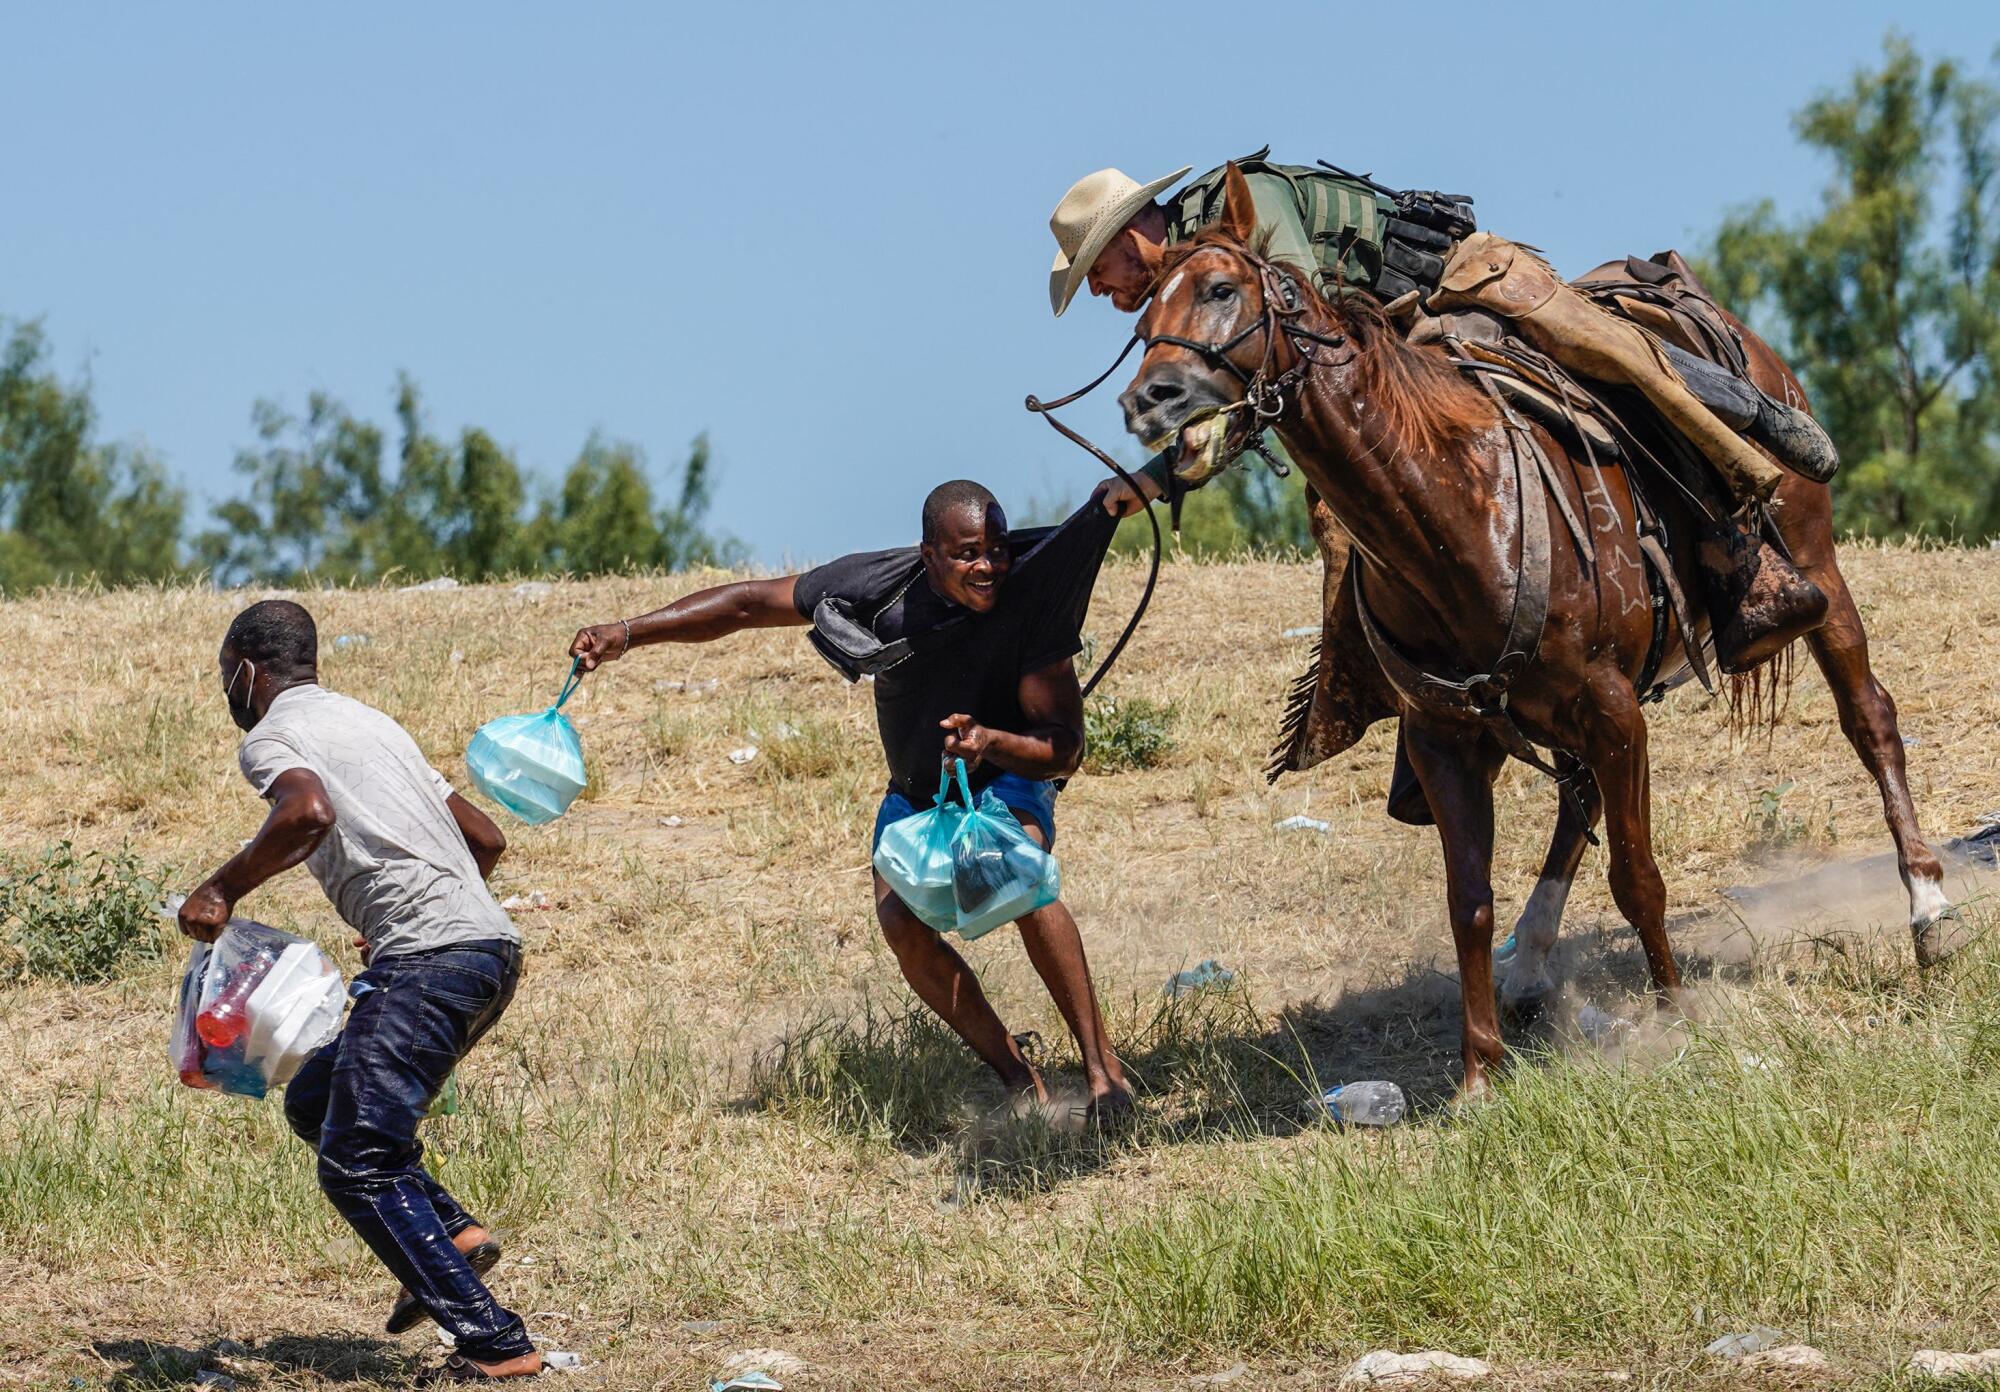 A Border Patrol agent on horseback tries to stop a Haitian migrant from entering an encampment.